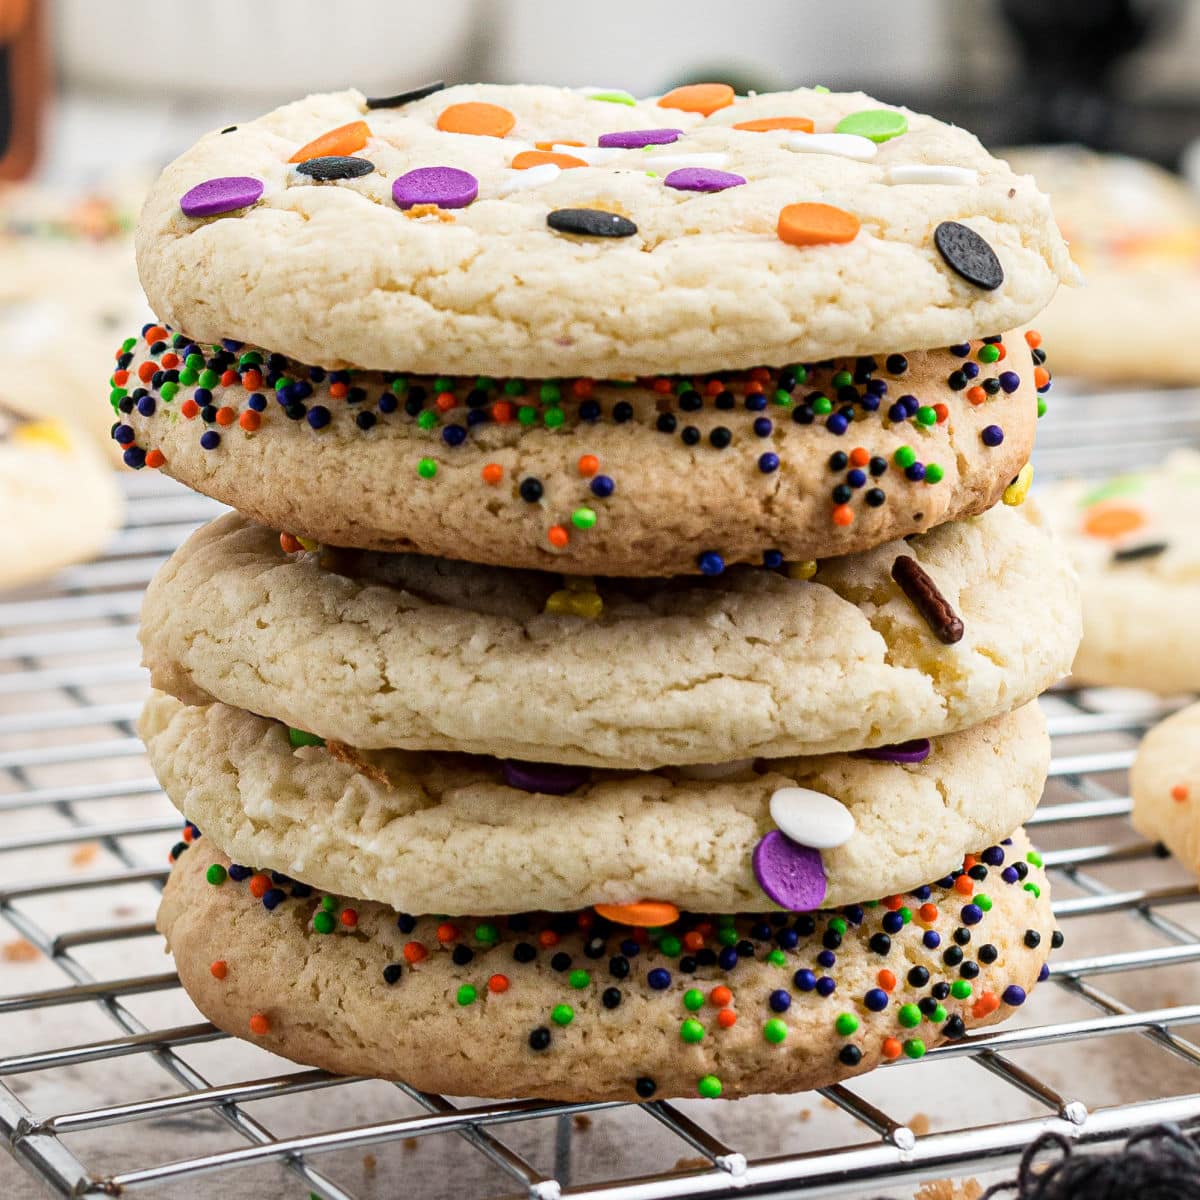 https://thecaglediaries.com/wp-content/uploads/2022/08/Halloween-Cookies-With-Sprinkles-Featured-Image.jpg